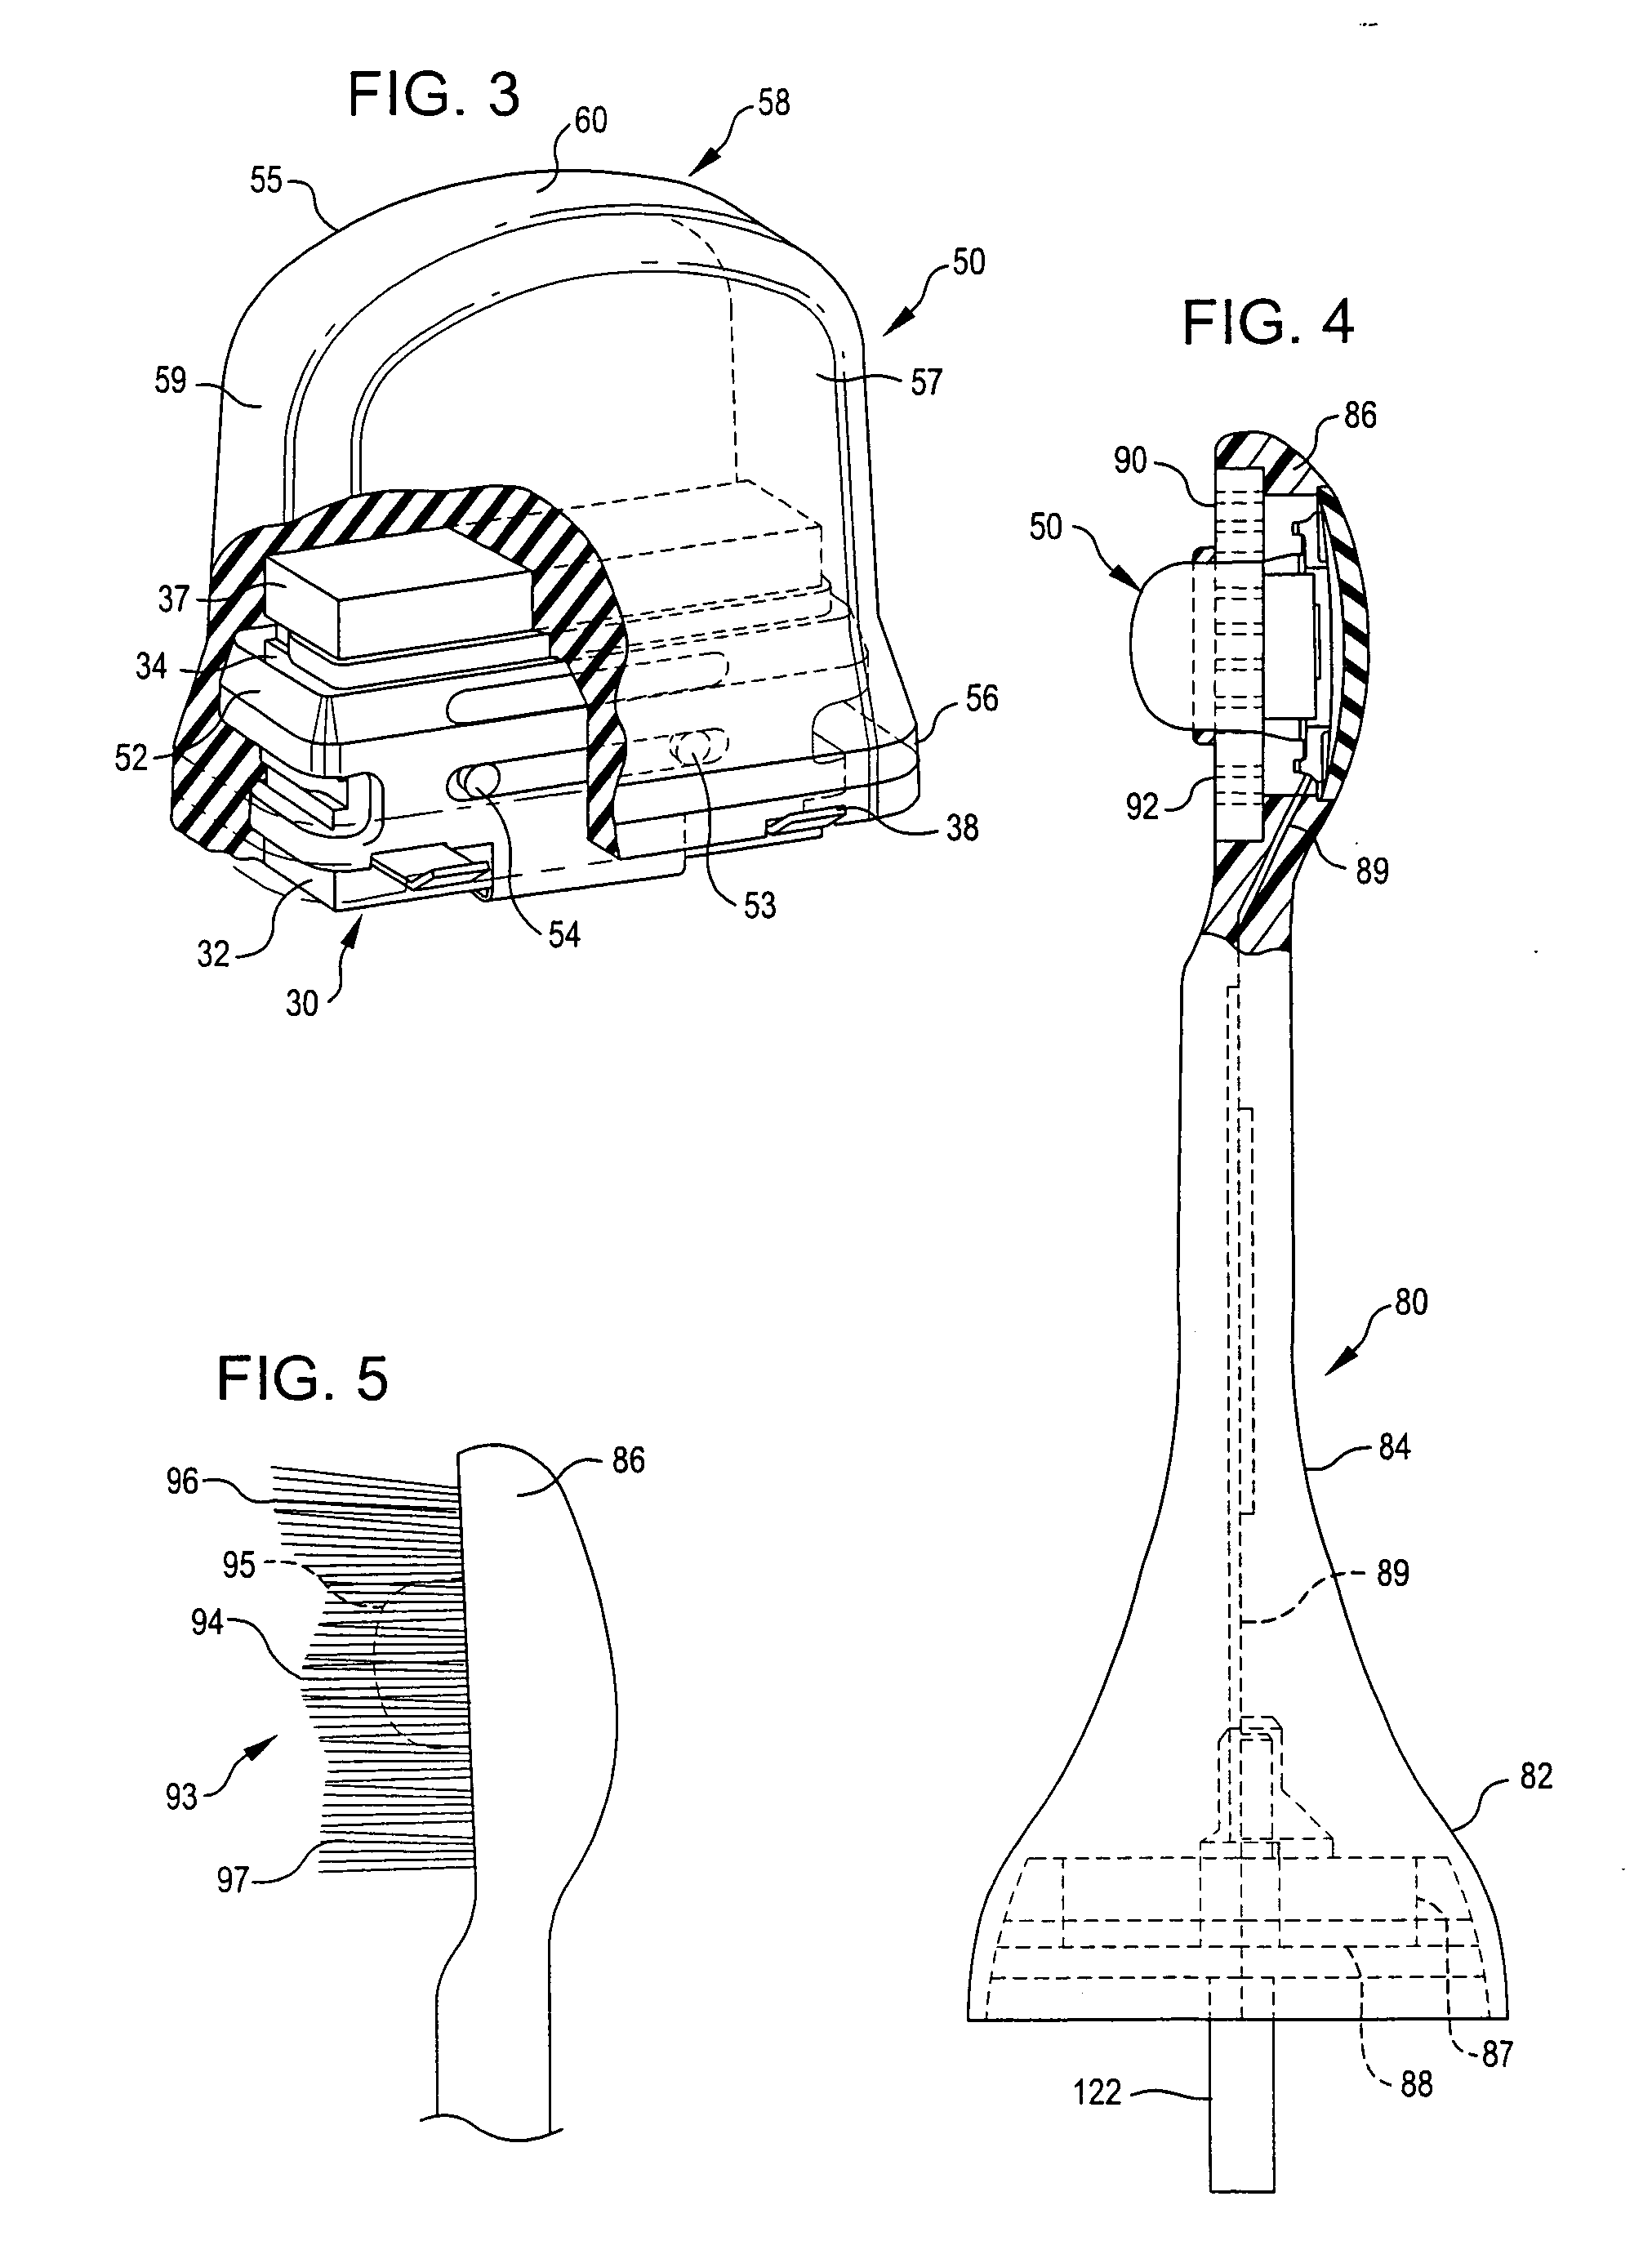 Oral hygiene devices employing an acoustic waveguide